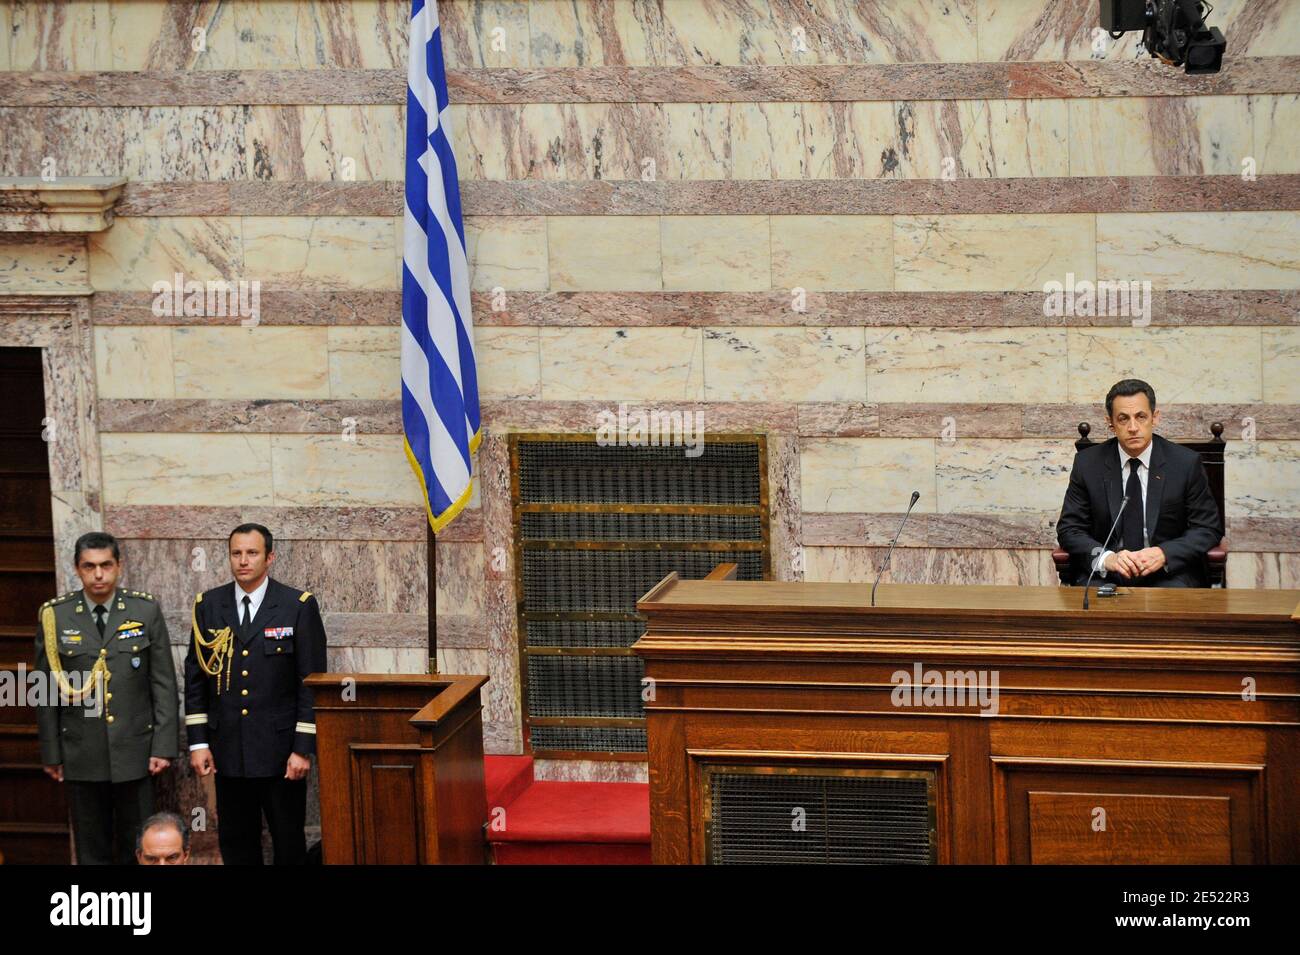 French President Nicolas Sarkozy looks on prior to addressing the Greek parliament in Athens, Greece on June 6, 2008. Sarkozy arrived in Greece Friday for an official visit, the first by a French head of state in more than 25 years. Sarkozy was addressing the Greek parliament in a ceremony only accorded to three foreign presidents in the past: his predecessor Charles de Gaulle and US presidents Dwight Eisenhower and George Bush Sr. Photo by Mousse/ABACAPRESS.COM Stock Photo